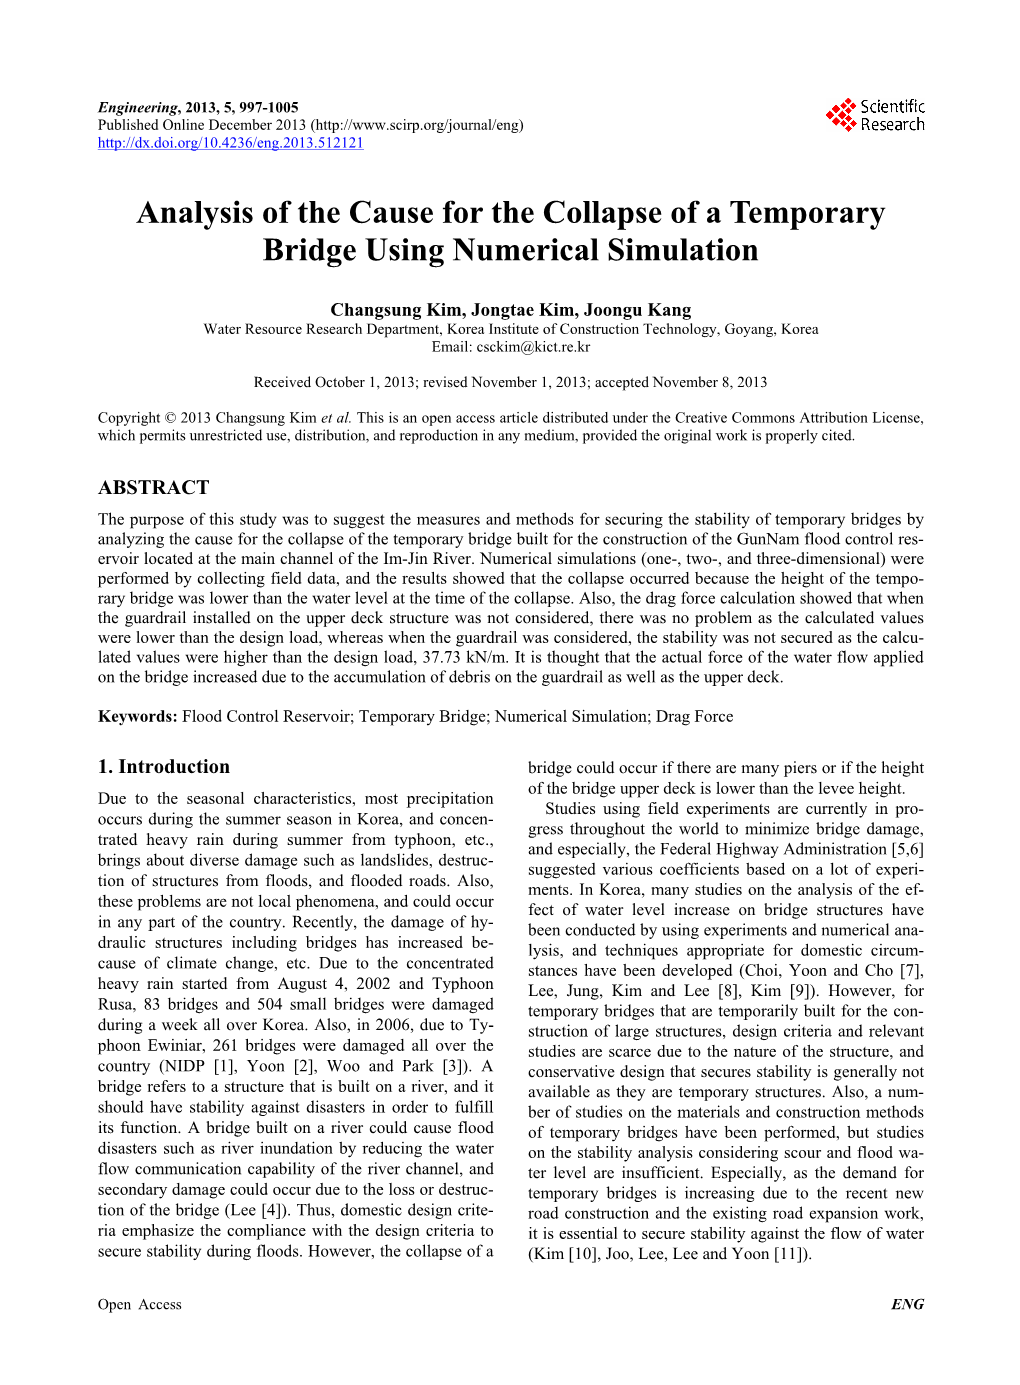 Analysis of the Cause for the Collapse of a Temporary Bridge Using Numerical Simulation